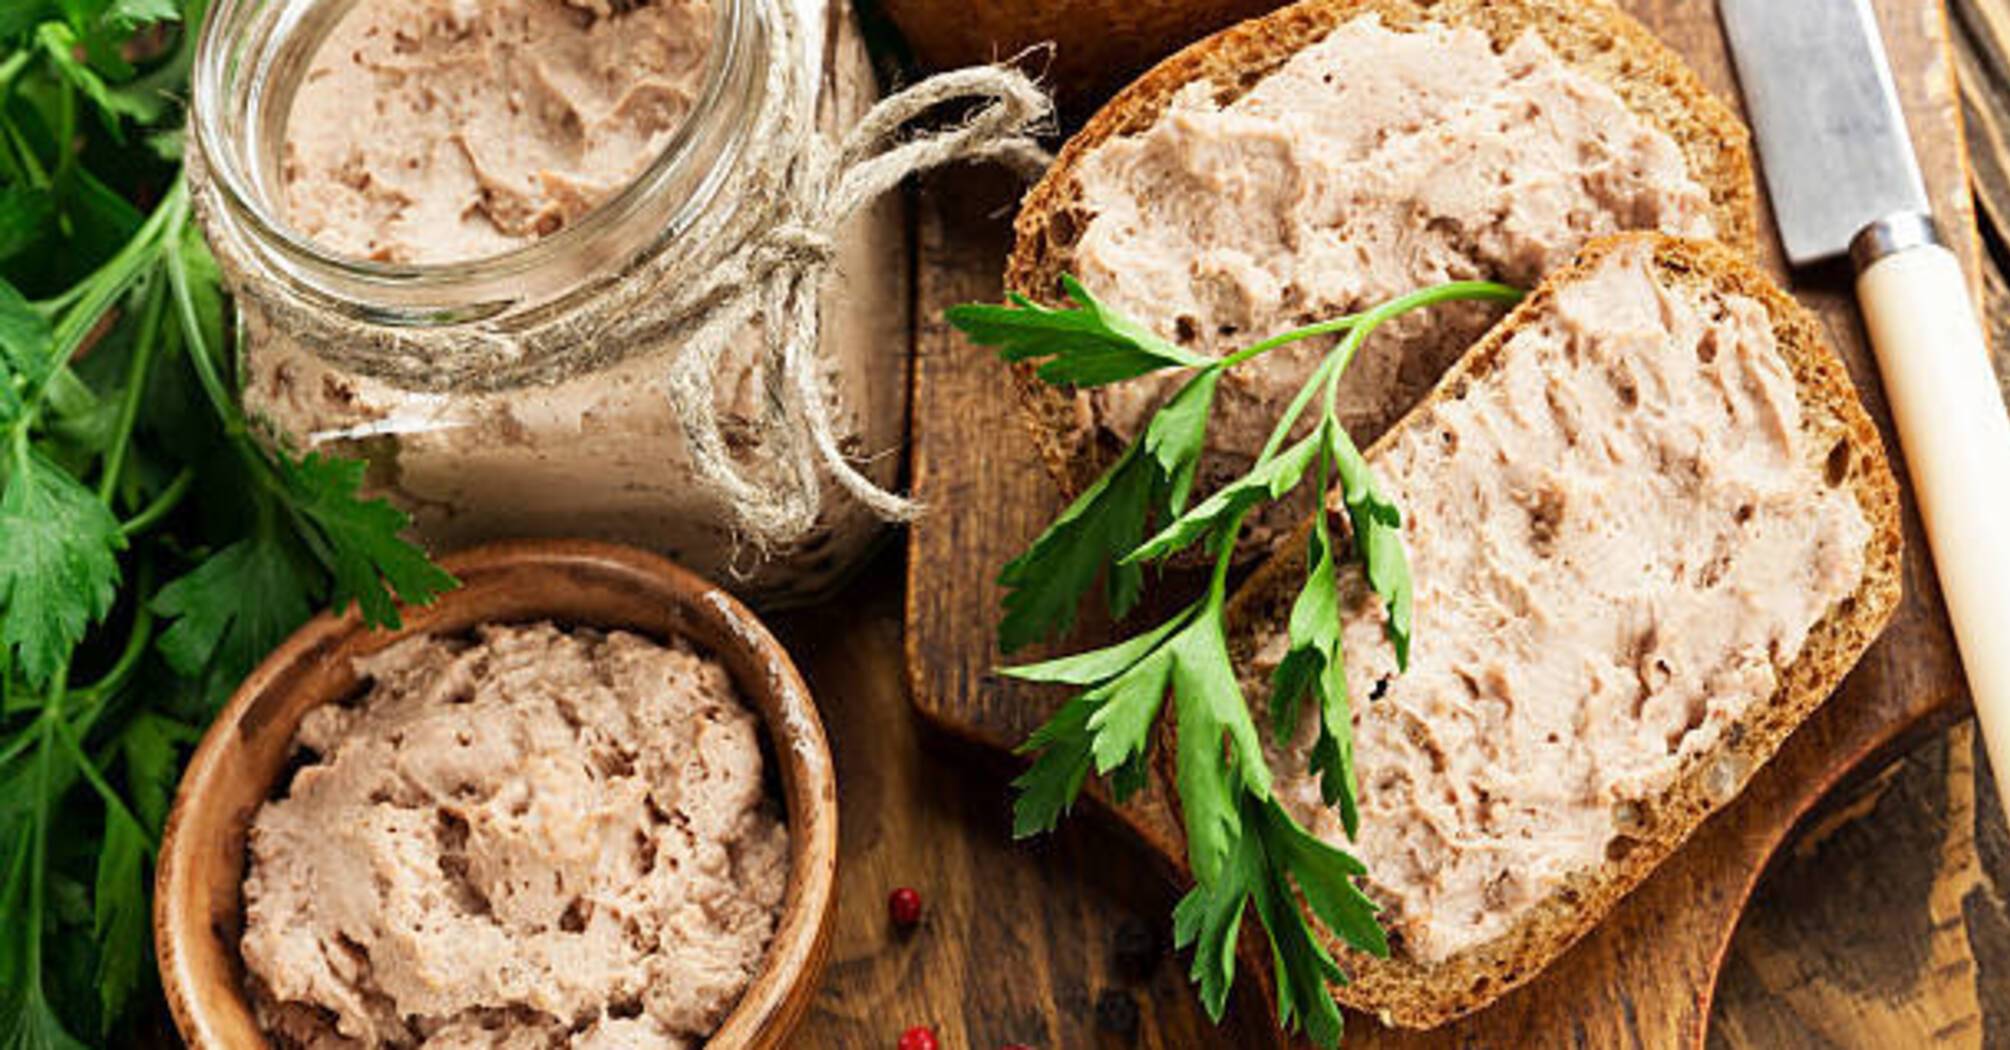 What to make a healthy pate from besides liver: even children can eat it